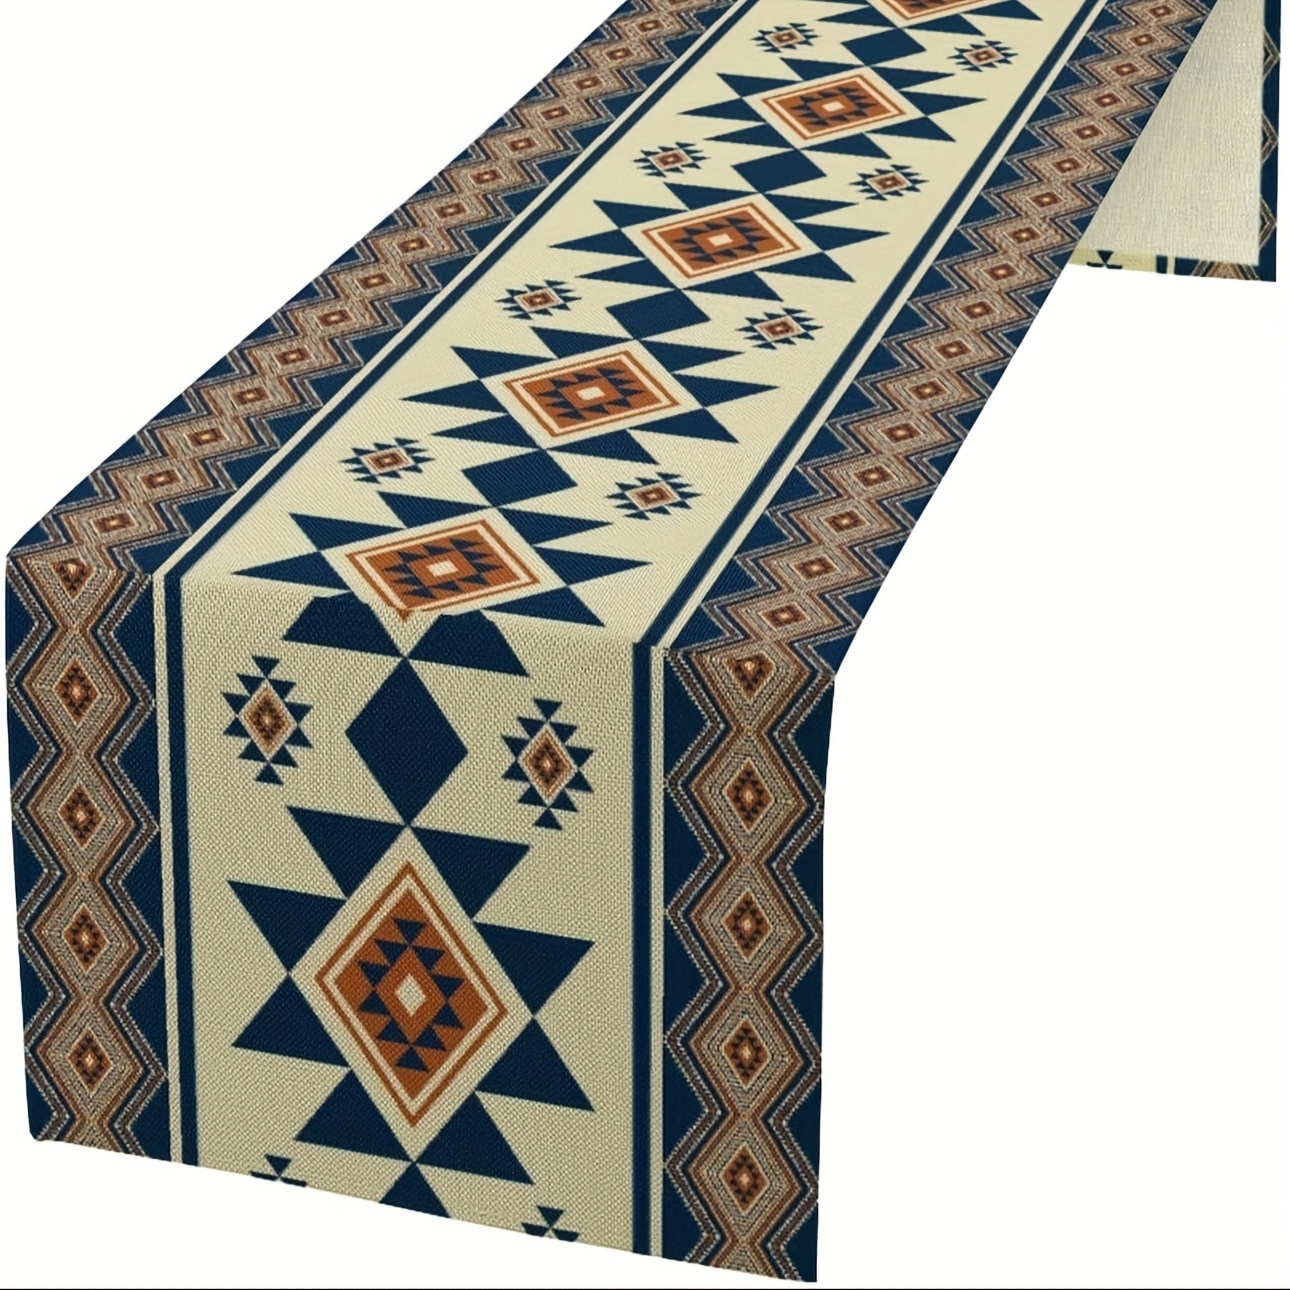 

1pc Aztec Table Runner, Colorful Southwest Navajo Indian Ethnic Geometric Stripes Table Decor, Aztec Table Runner For Dining Room Kitchen